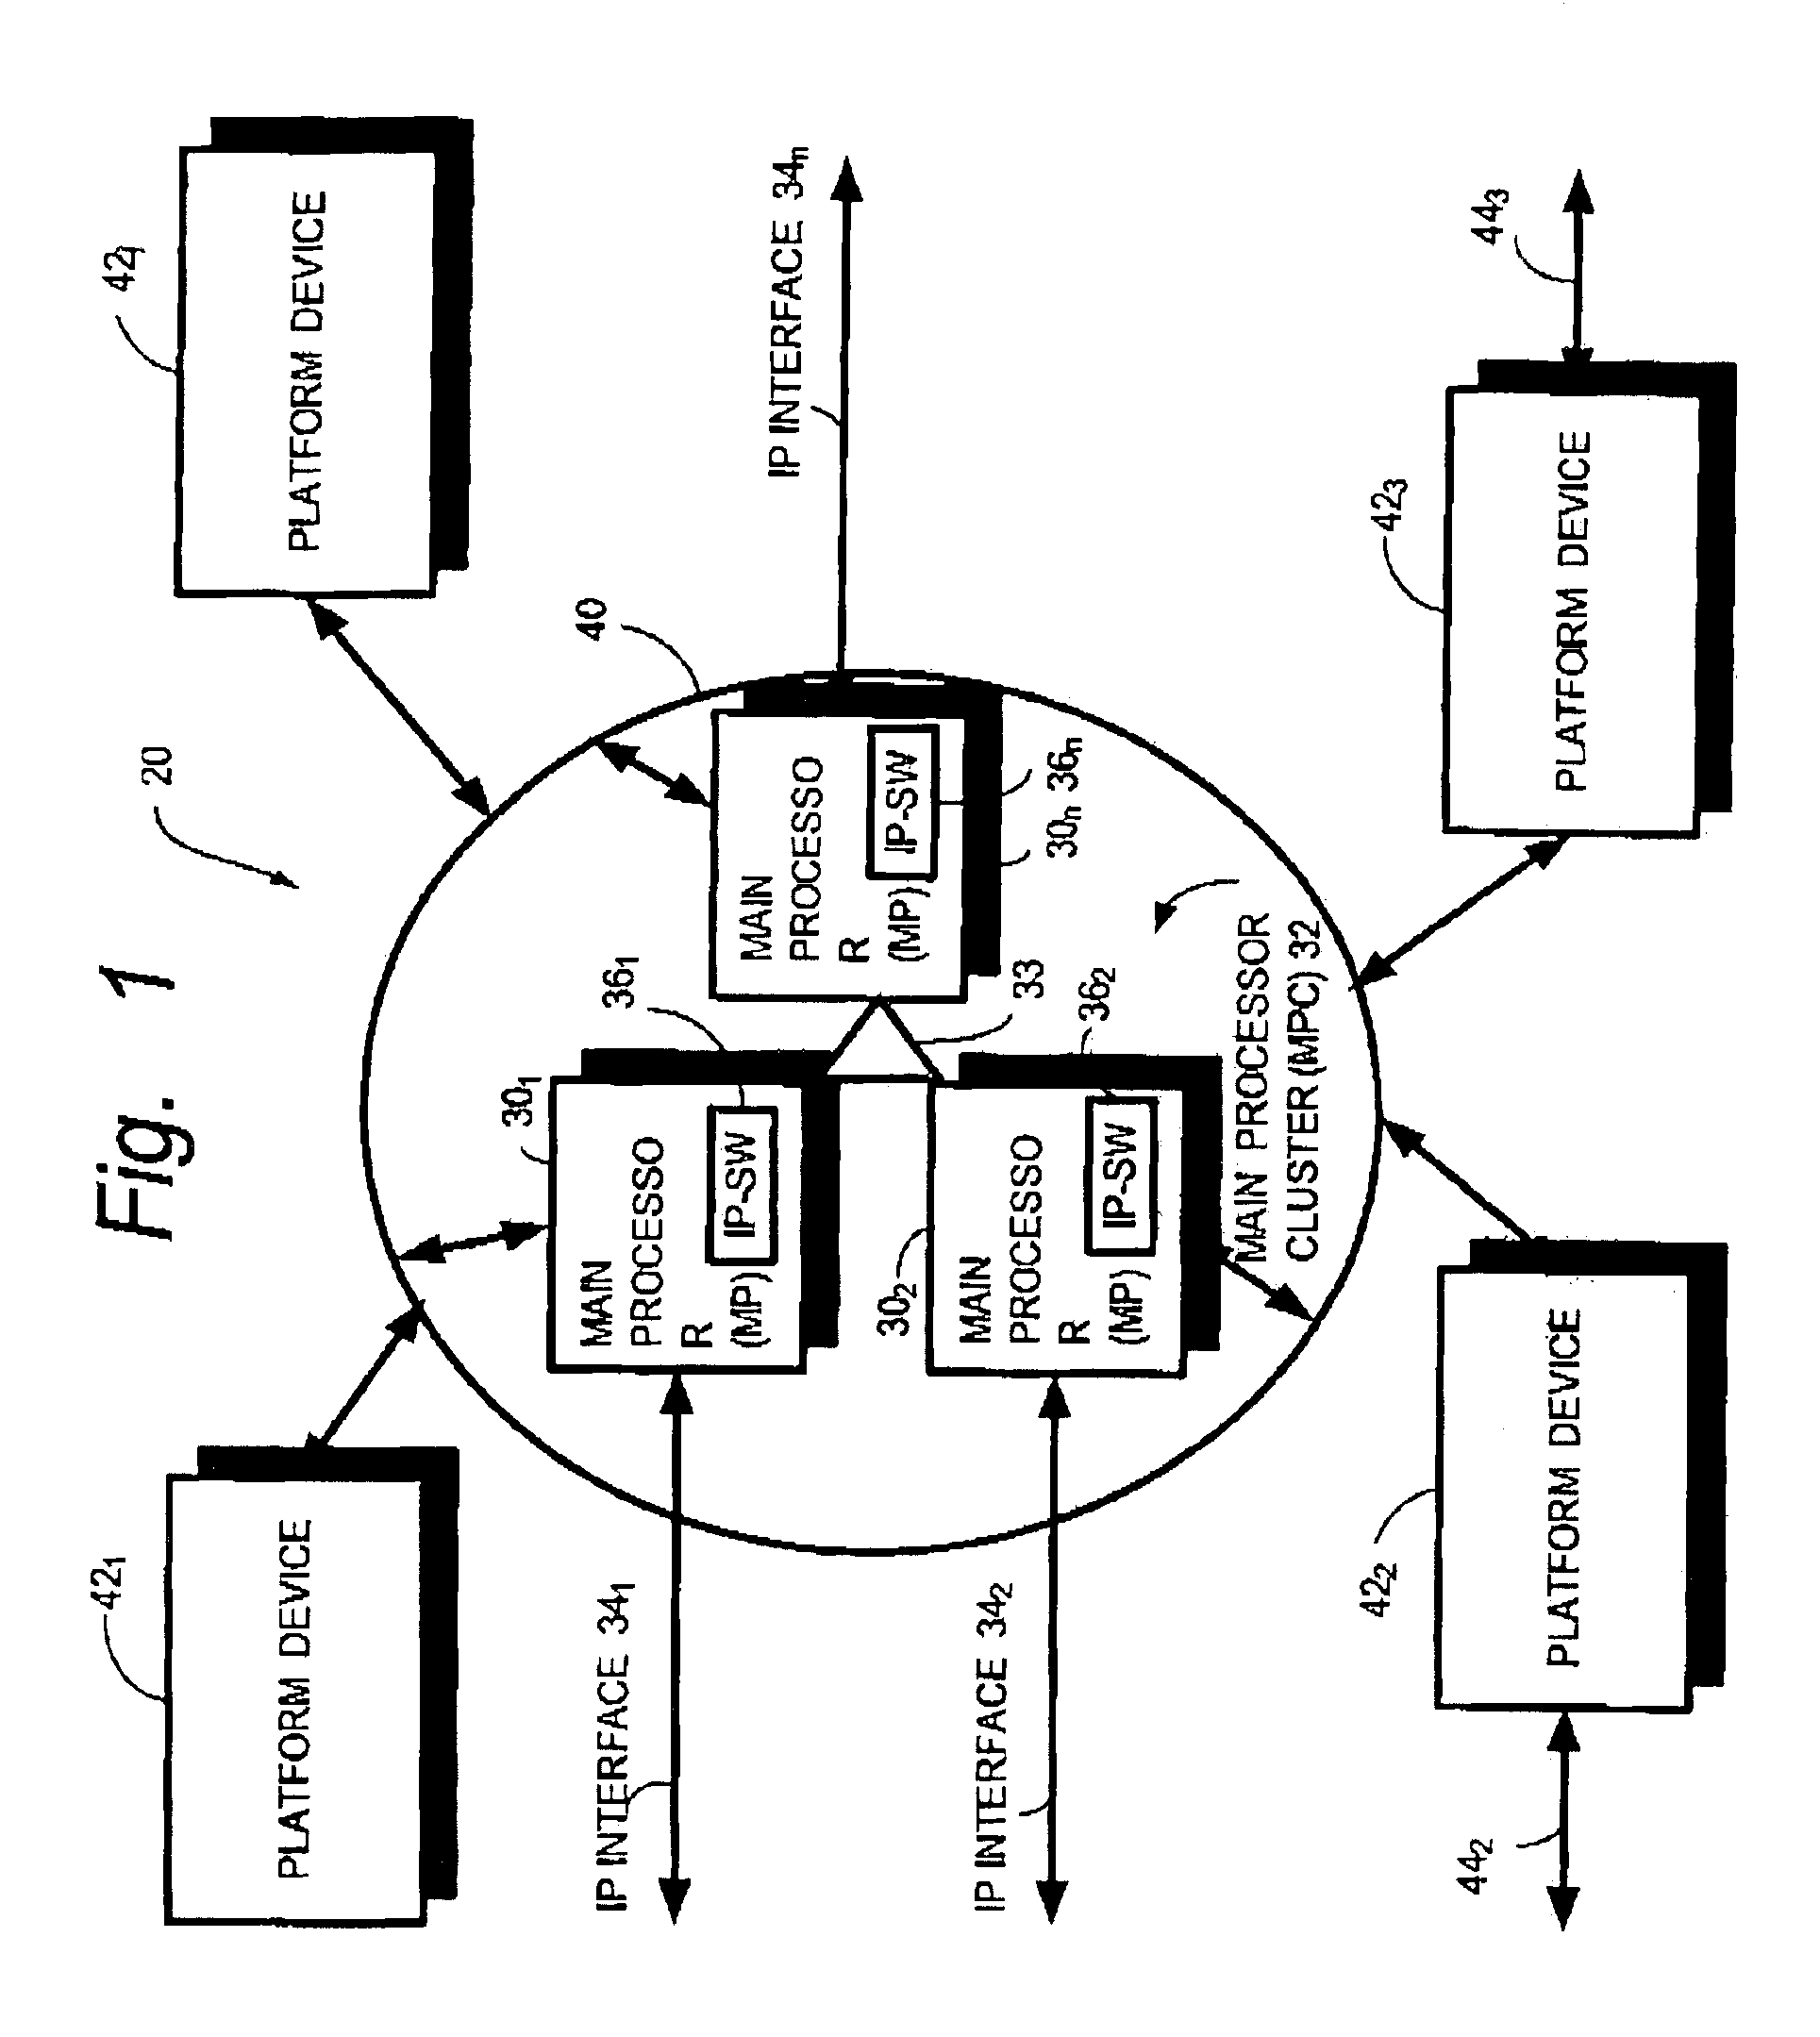 Single IP-addressing for a telecommunications platform with a multi-processor cluster using a distributed socket based internet protocol (IP) handler